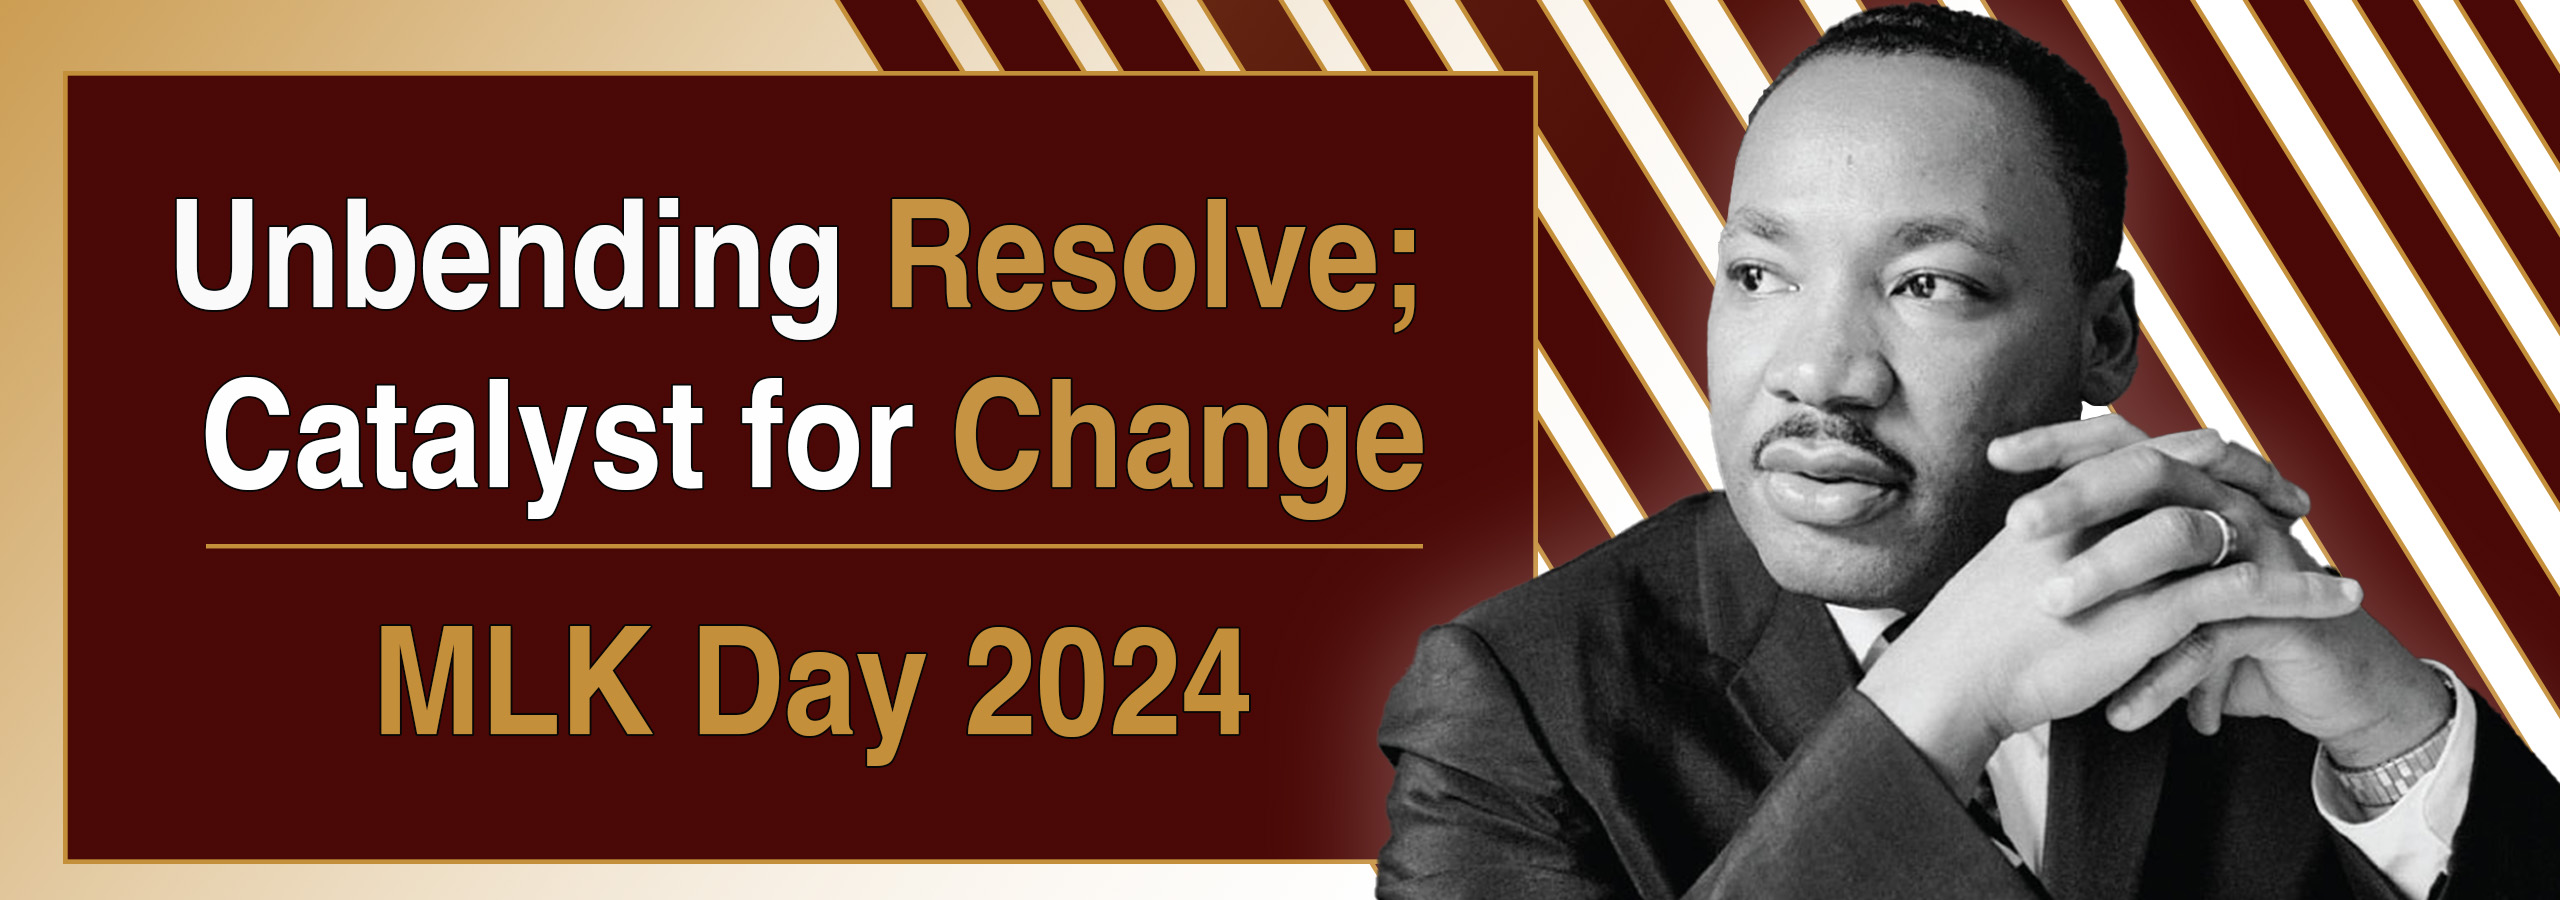 The MLK Day 2024 campaign, Unbending Resolve; Catalyst for Change features an image of Dr. Martin Luther King, Jr. resting against a striped background.